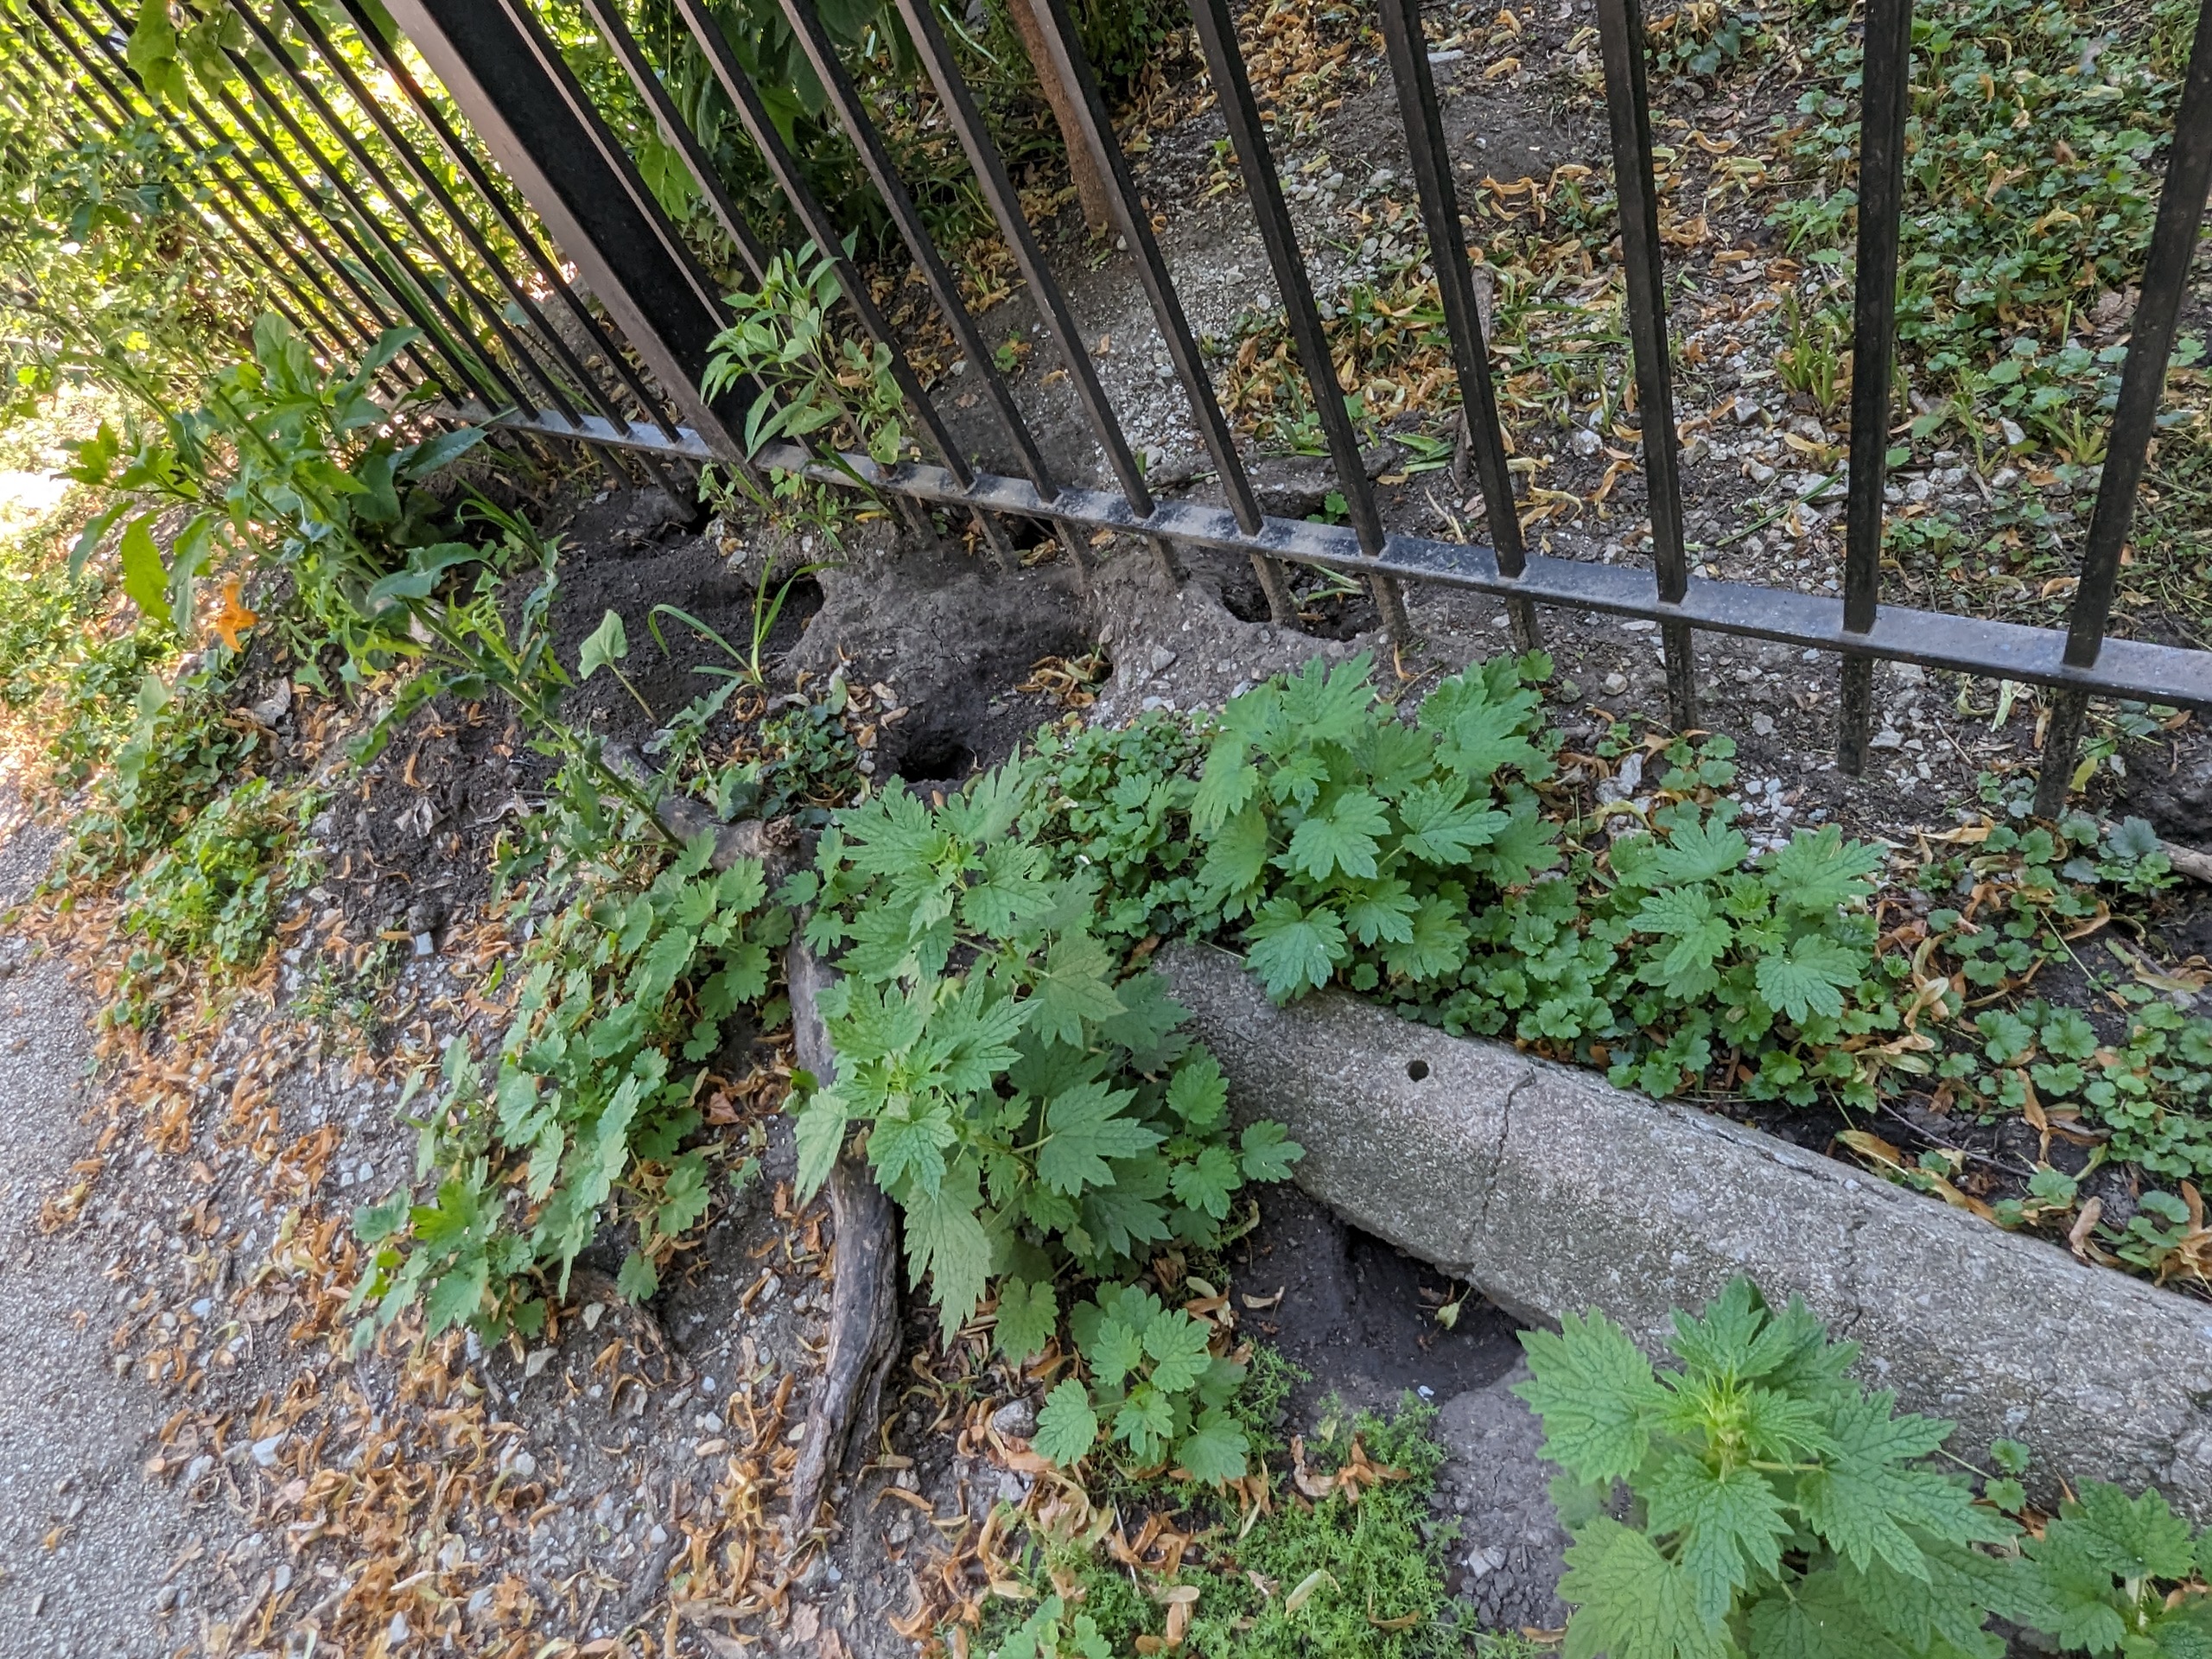 Rat holes in the backyard of a Chicago Housing Authority building in the Rogers Park neighborhood. A city inspector found 20 rat holes at the site. (Credit: Casey Toner/Illinois Answers Project)